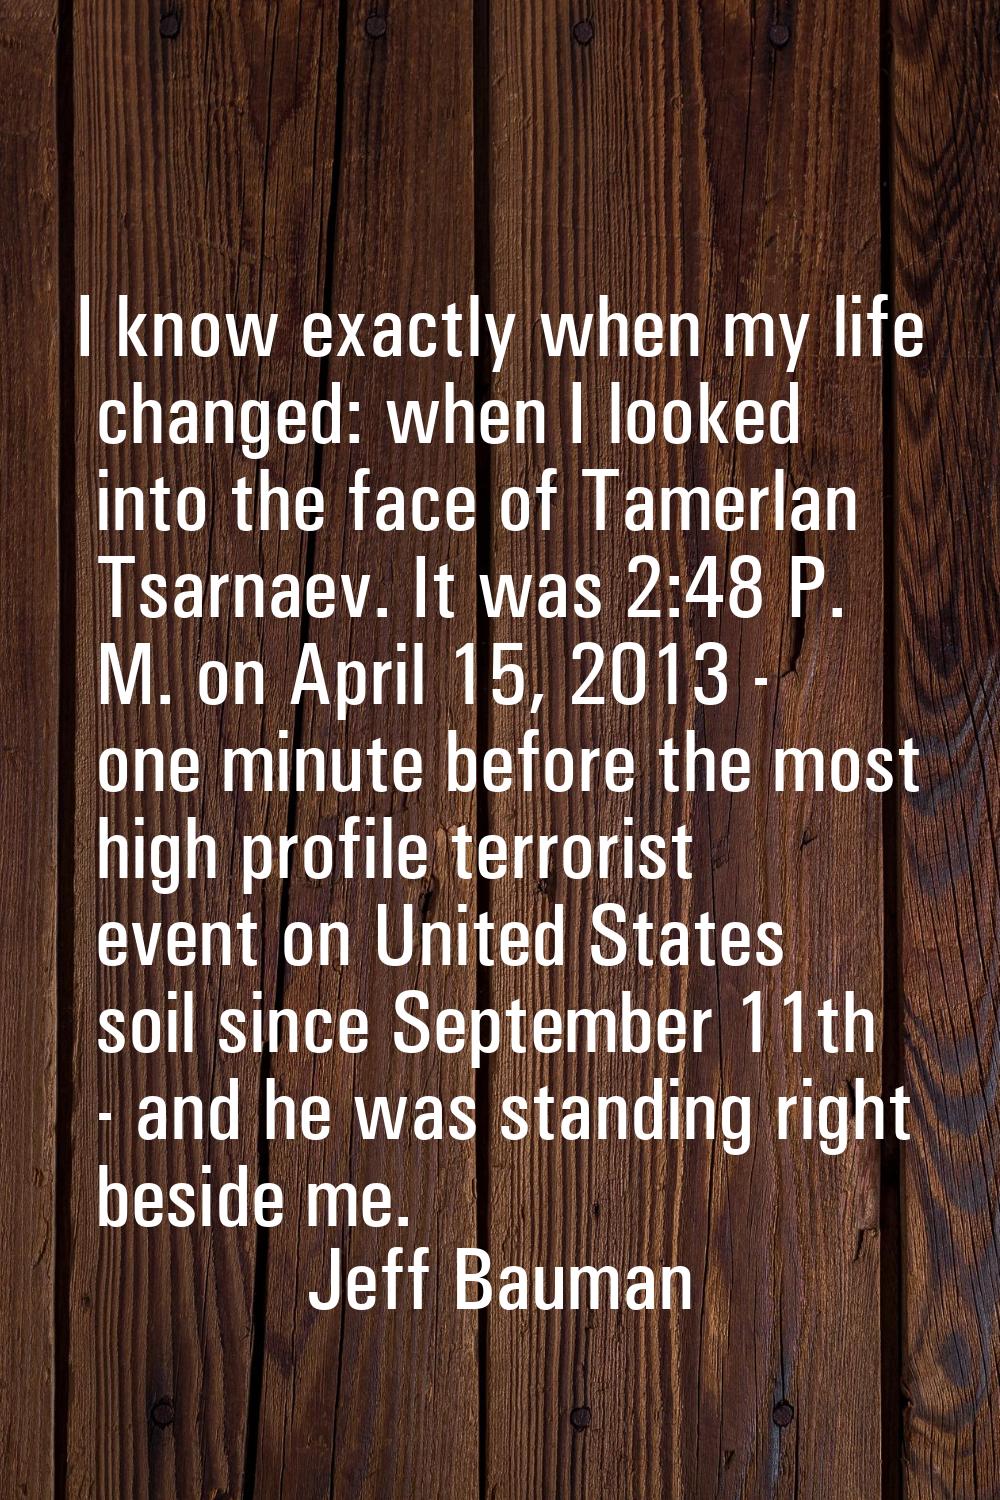 I know exactly when my life changed: when I looked into the face of Tamerlan Tsarnaev. It was 2:48 